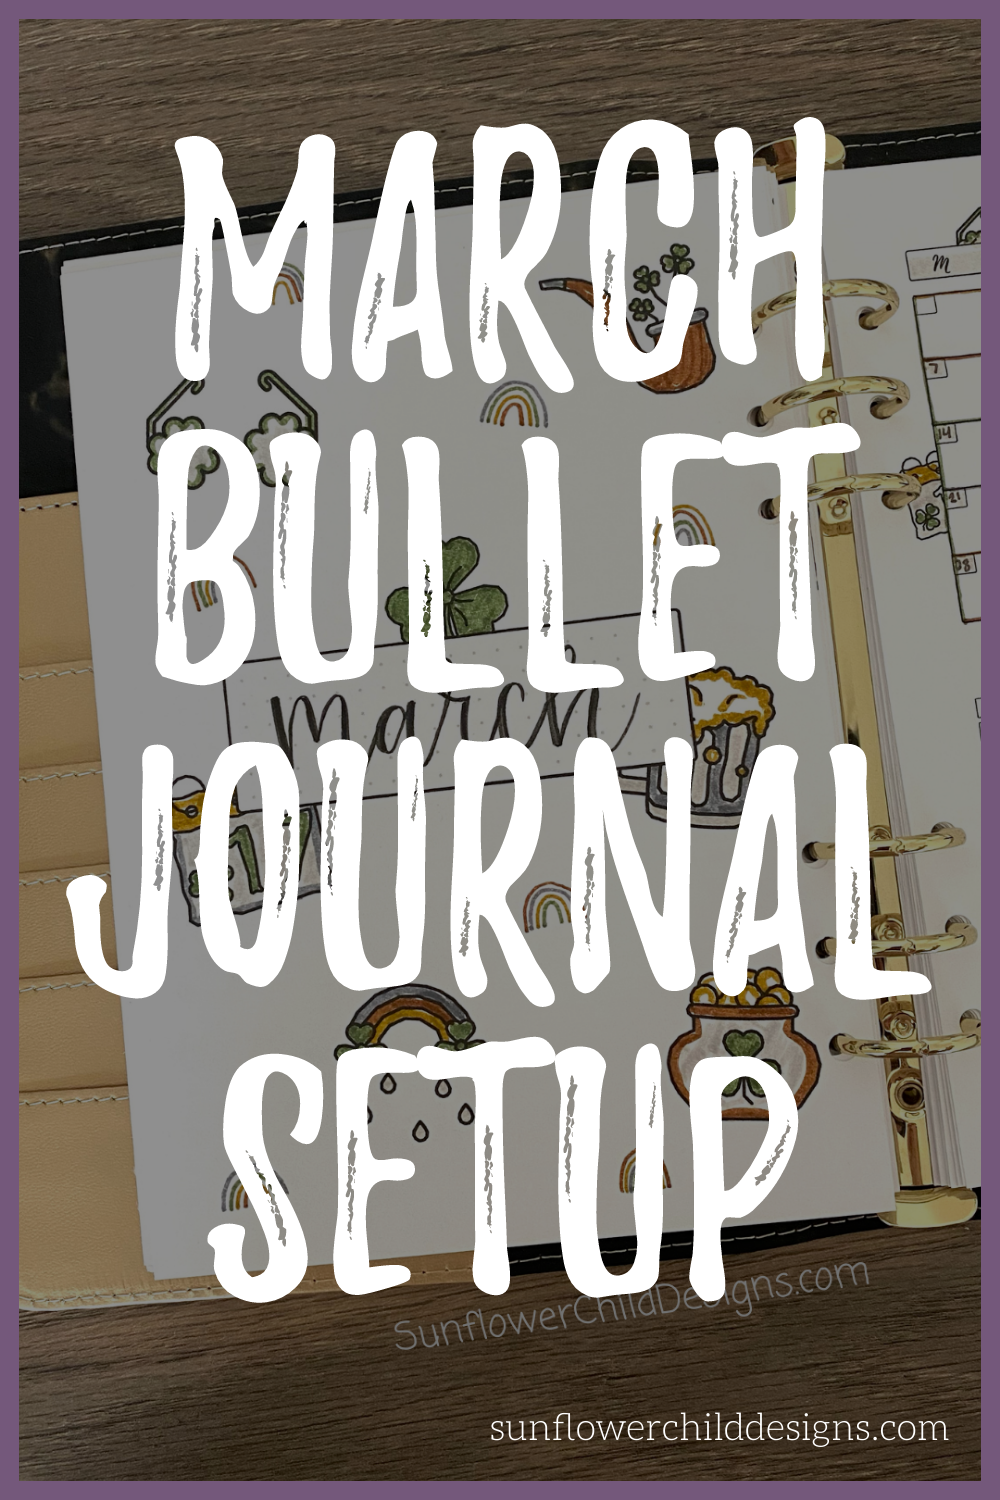 2-more-purple-1000x1500-layout2485-2022-bullet-march-printables-1h12o0u.png